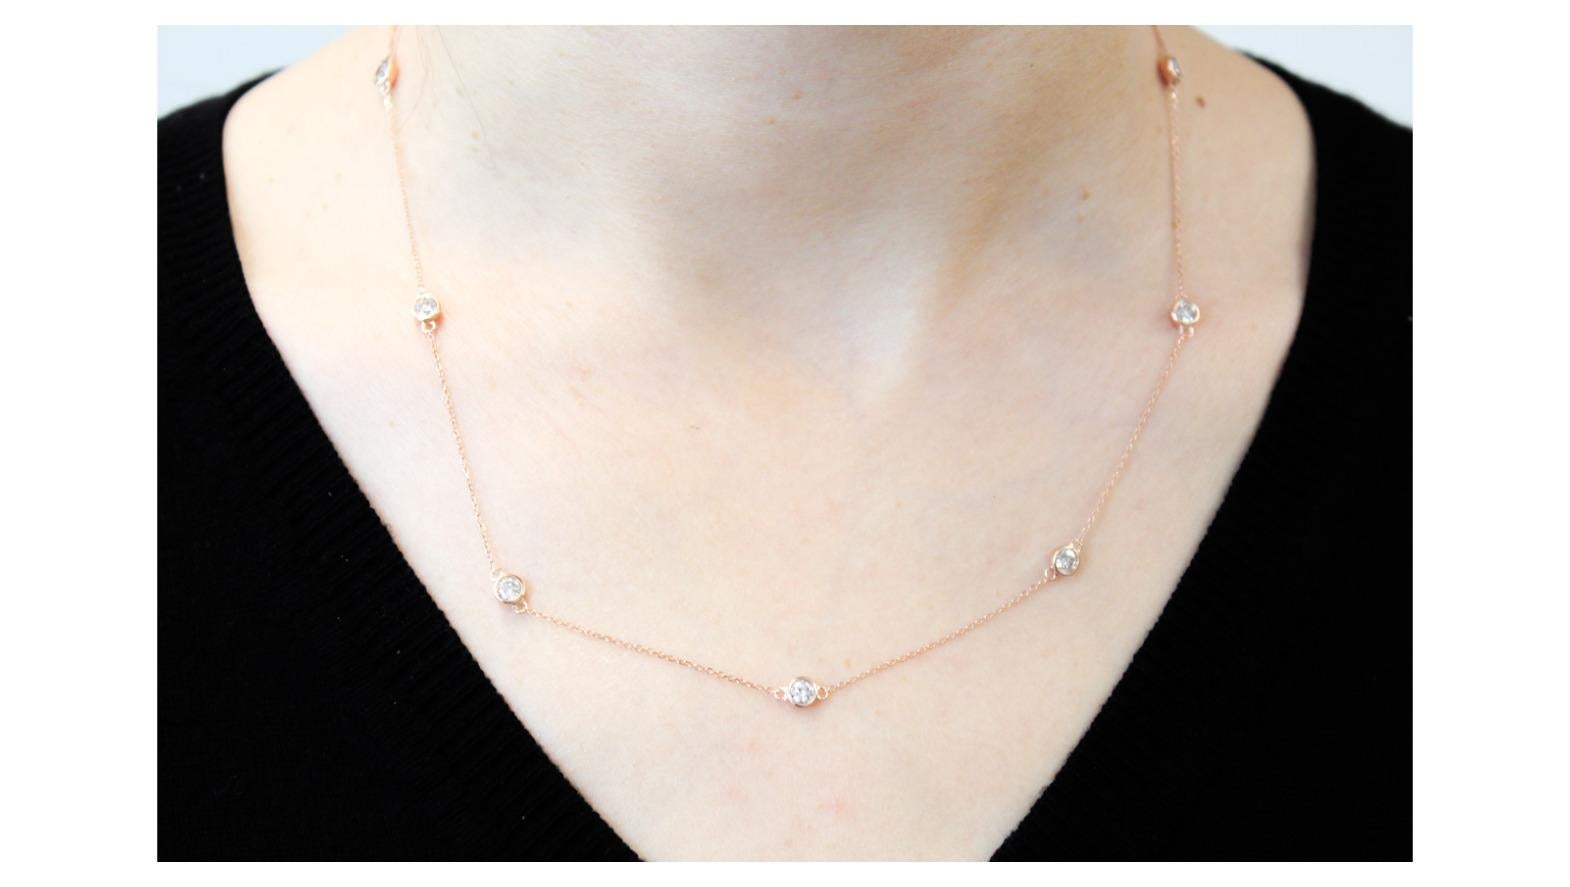 A gorgeous diamond necklace will rarely go overlooked. This 18” piece is both rare and stunning. It includes bezels that set white round diamonds. There are 10 white diamonds that total 0.25 and are I-J color and I1/I2 clarity. This versatile